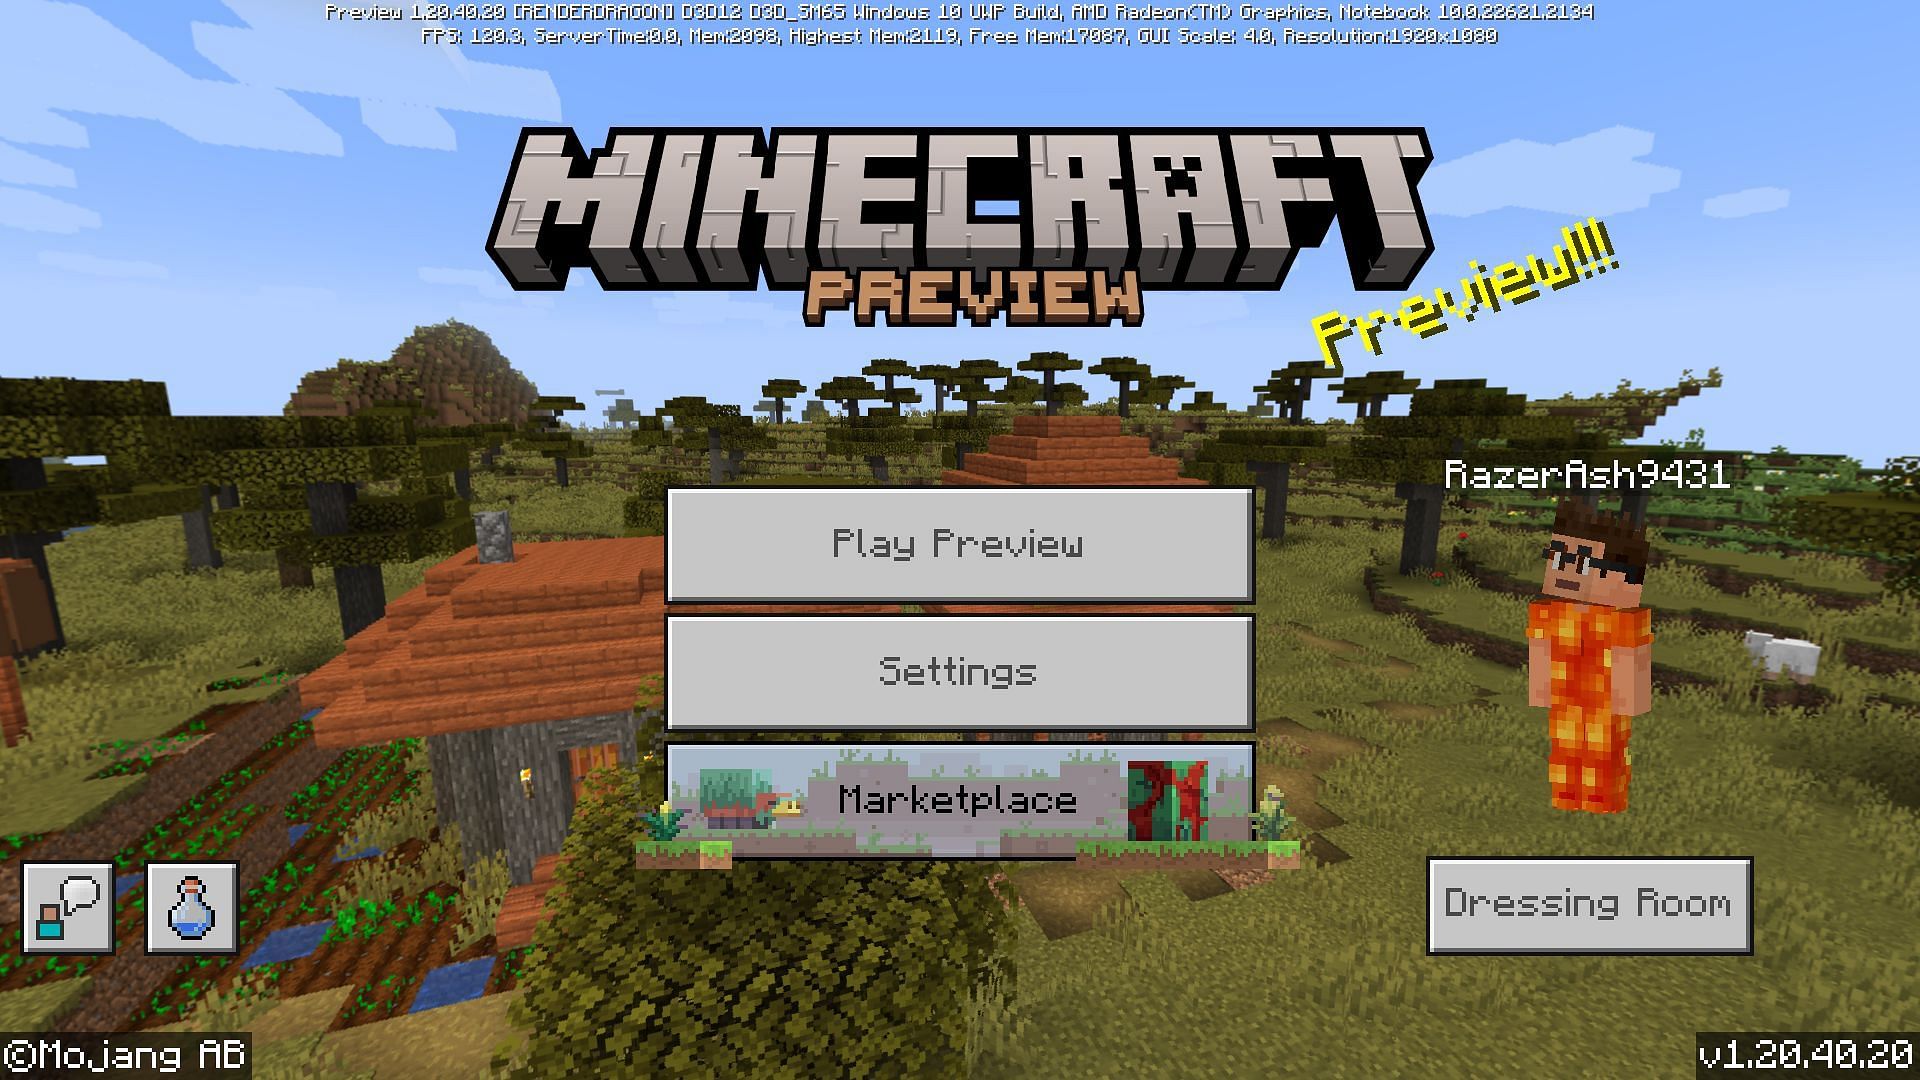 Minecraft Preview will contain loads of new and experimental features that Mojang is working on for the upcoming update. (Image via Mojang)